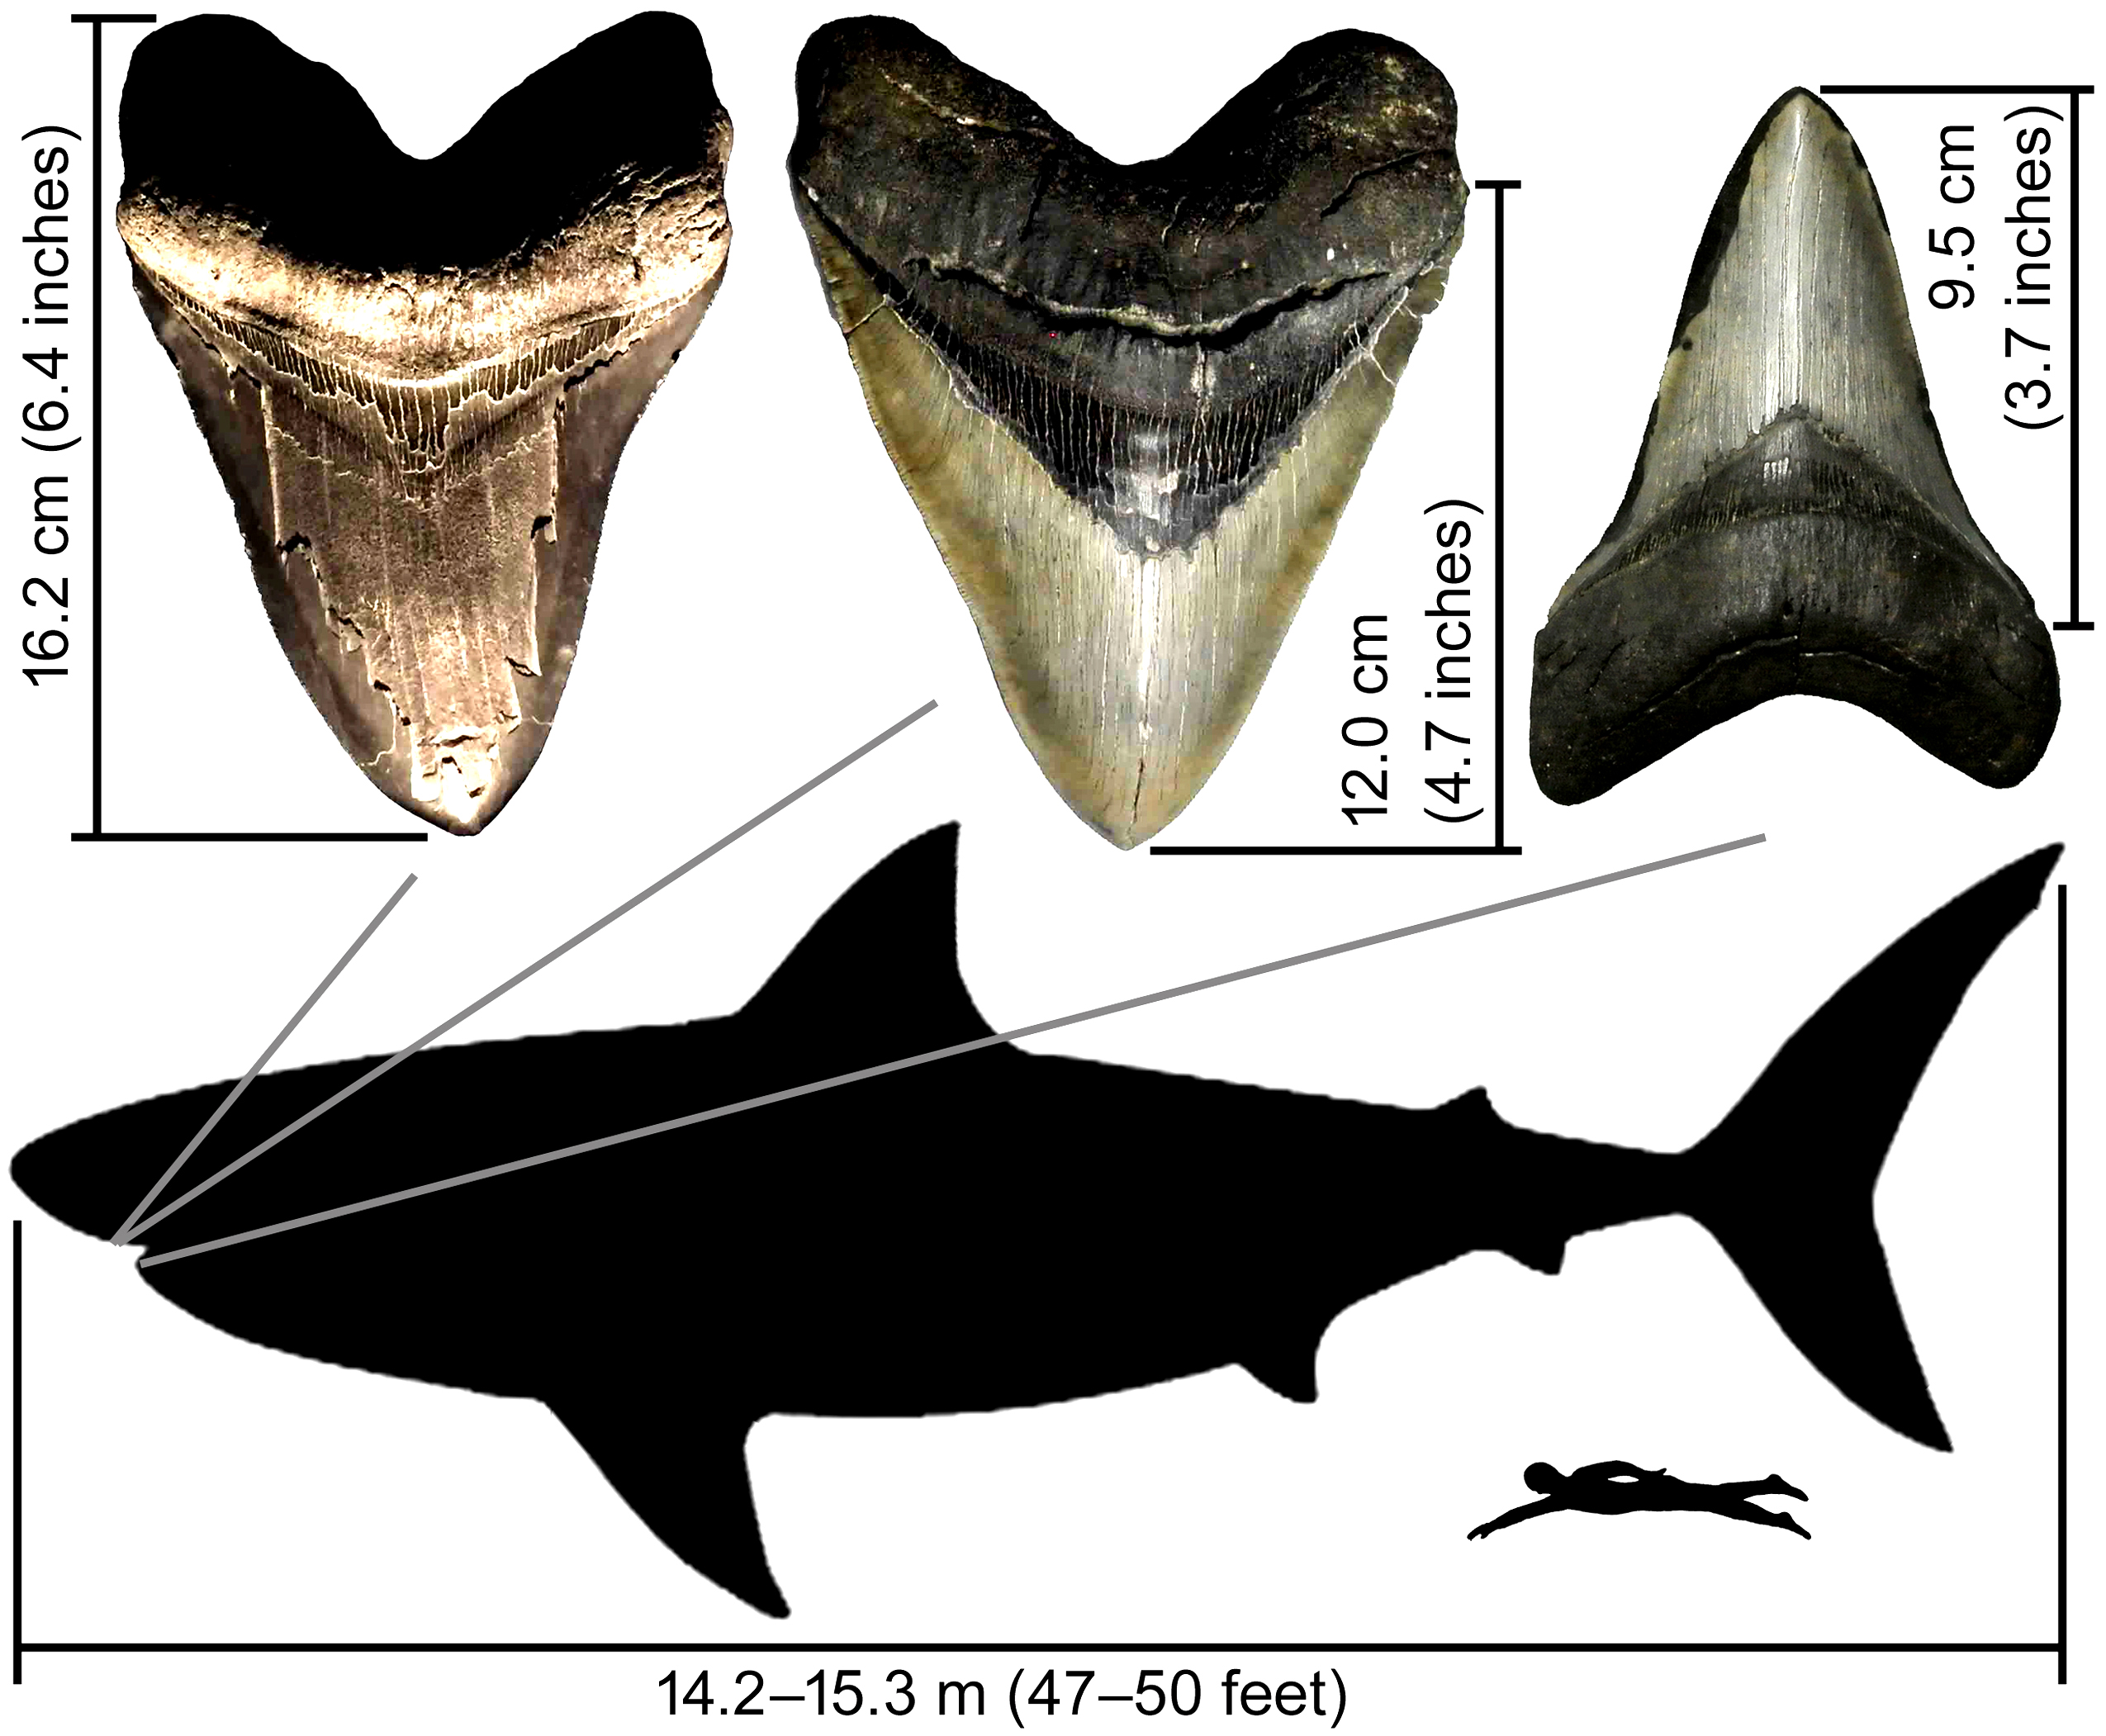 Newswise: Paleobiologist Clarifies Scientific Record of the Size of Extinct Megatooth Shark